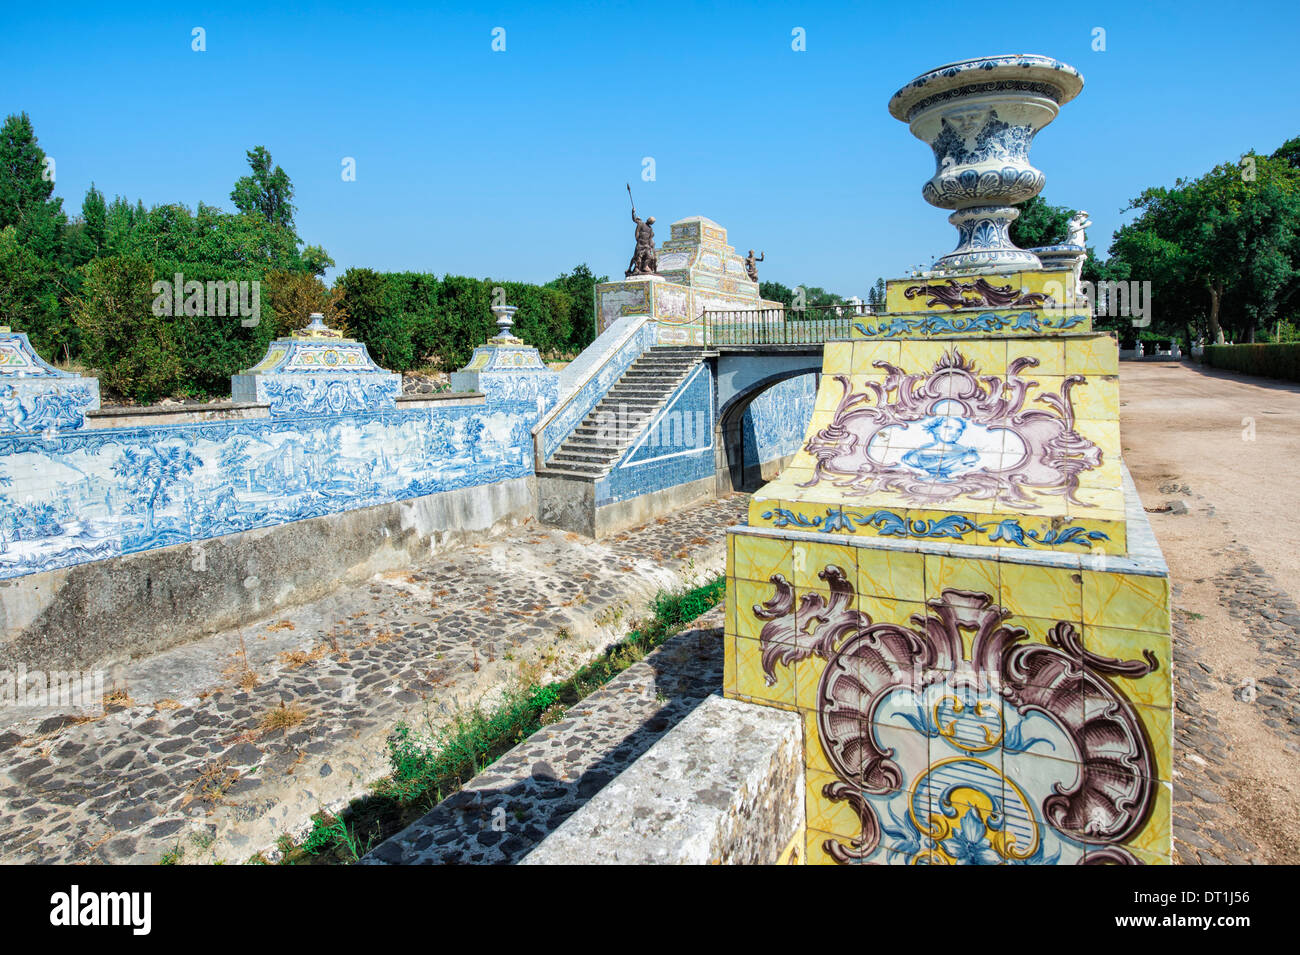 Azulejos of the tiled canal, Royal Summer Palace of Queluz, Lisbon, Portugal, Europe Stock Photo